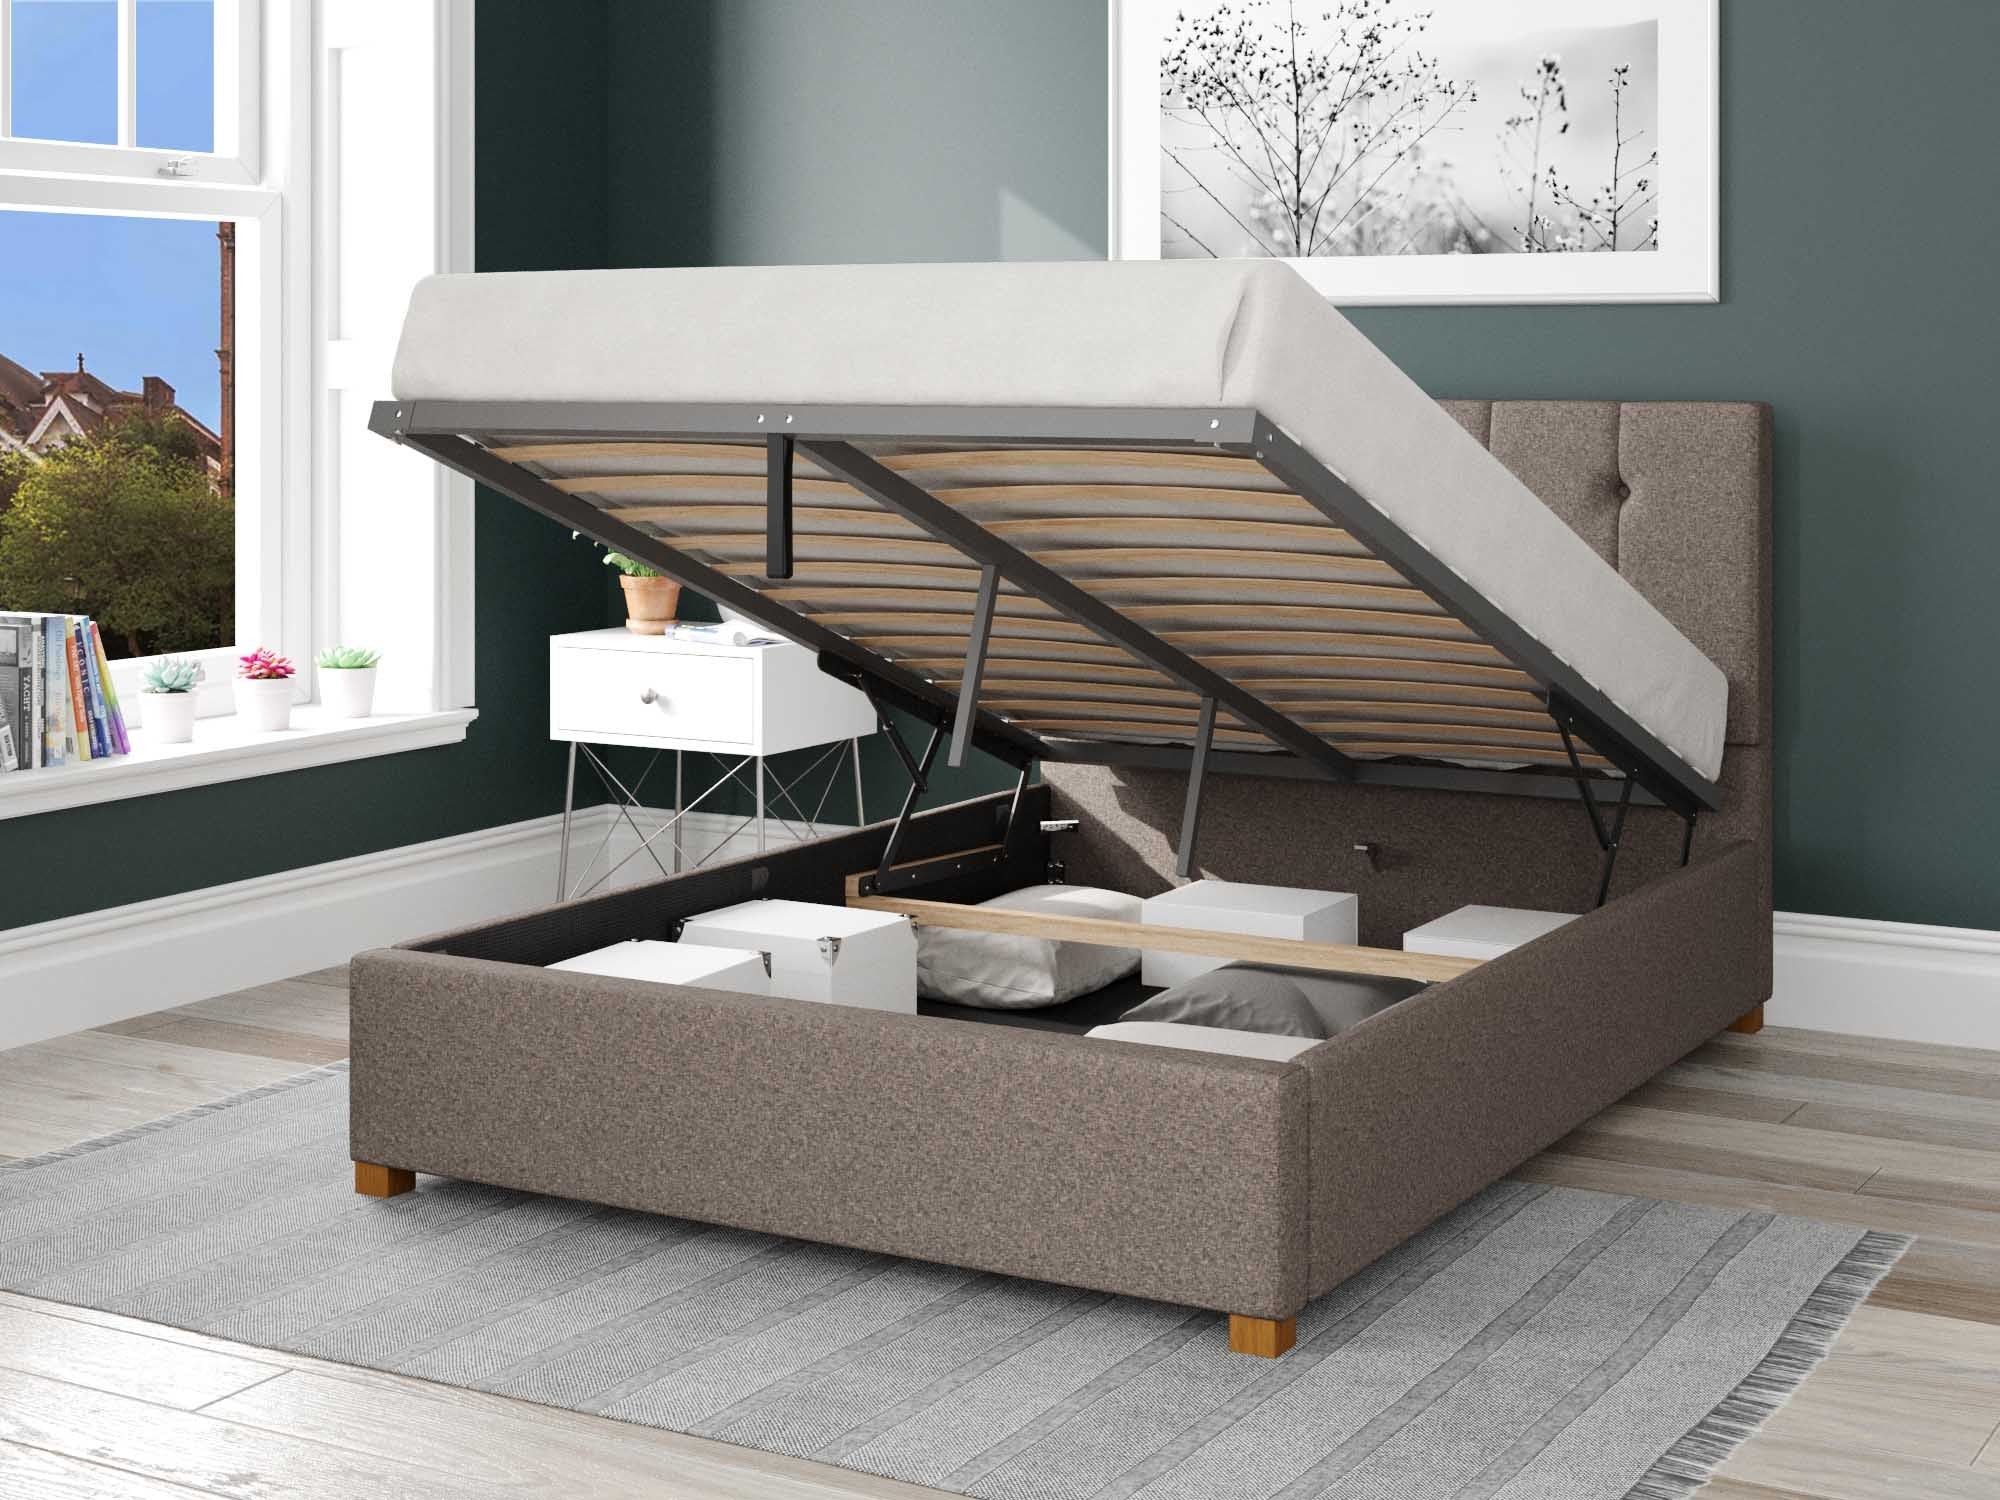 Hepburn Fabric Ottoman Bed - Yorkshire Knit - Mineral